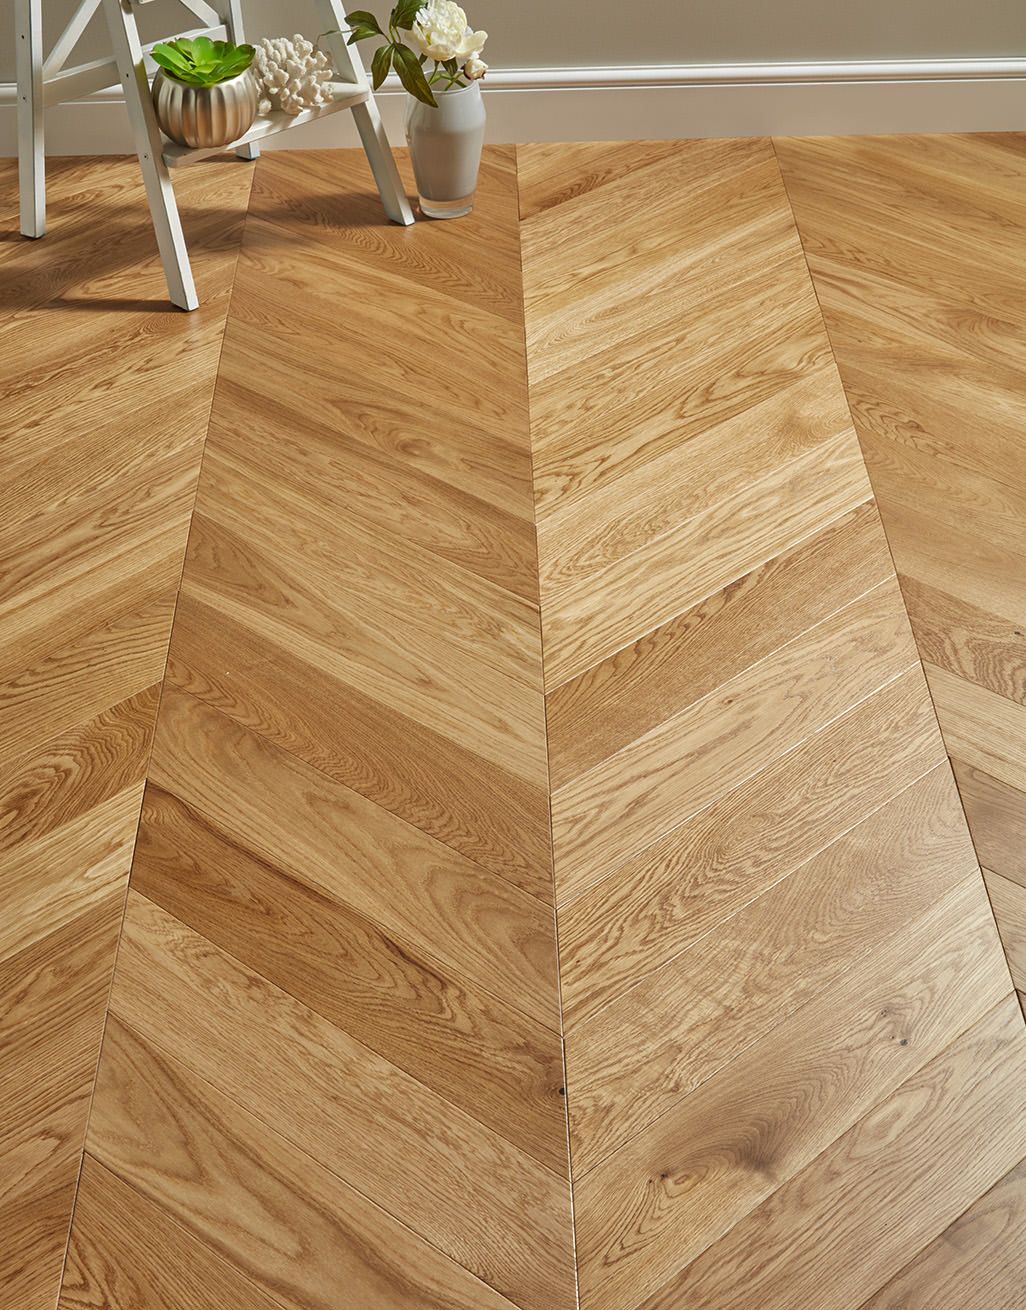 Chelsea Chevron - Natural Oak Brushed & Lacquered Engineered Wood Flooring 1